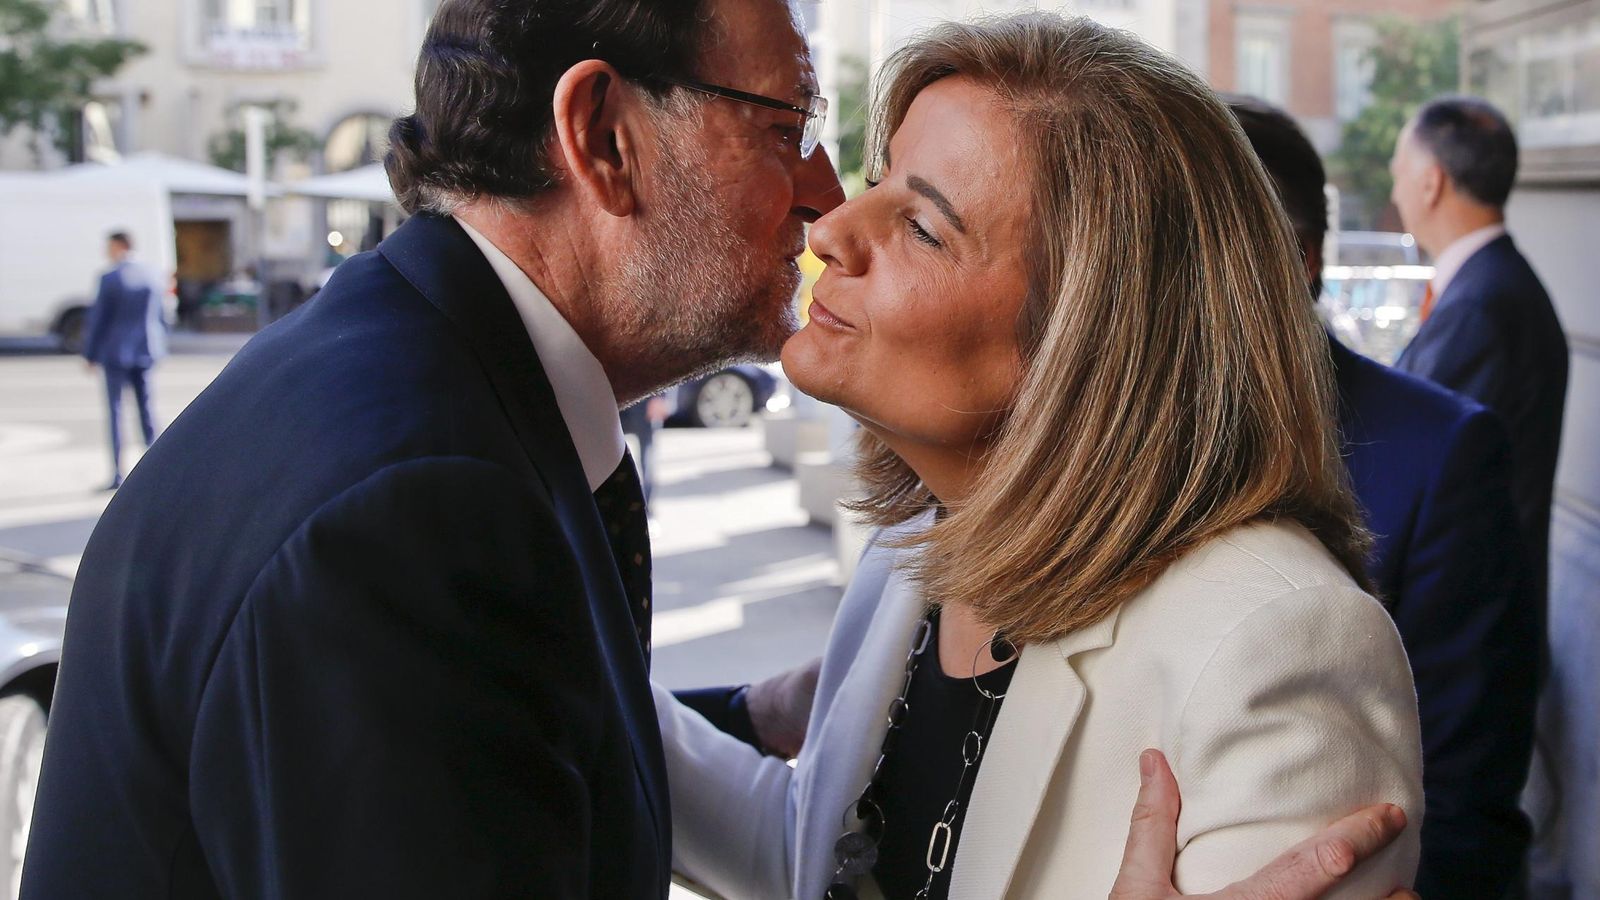 Foto: Rajoy embraces banez before an event in madrid